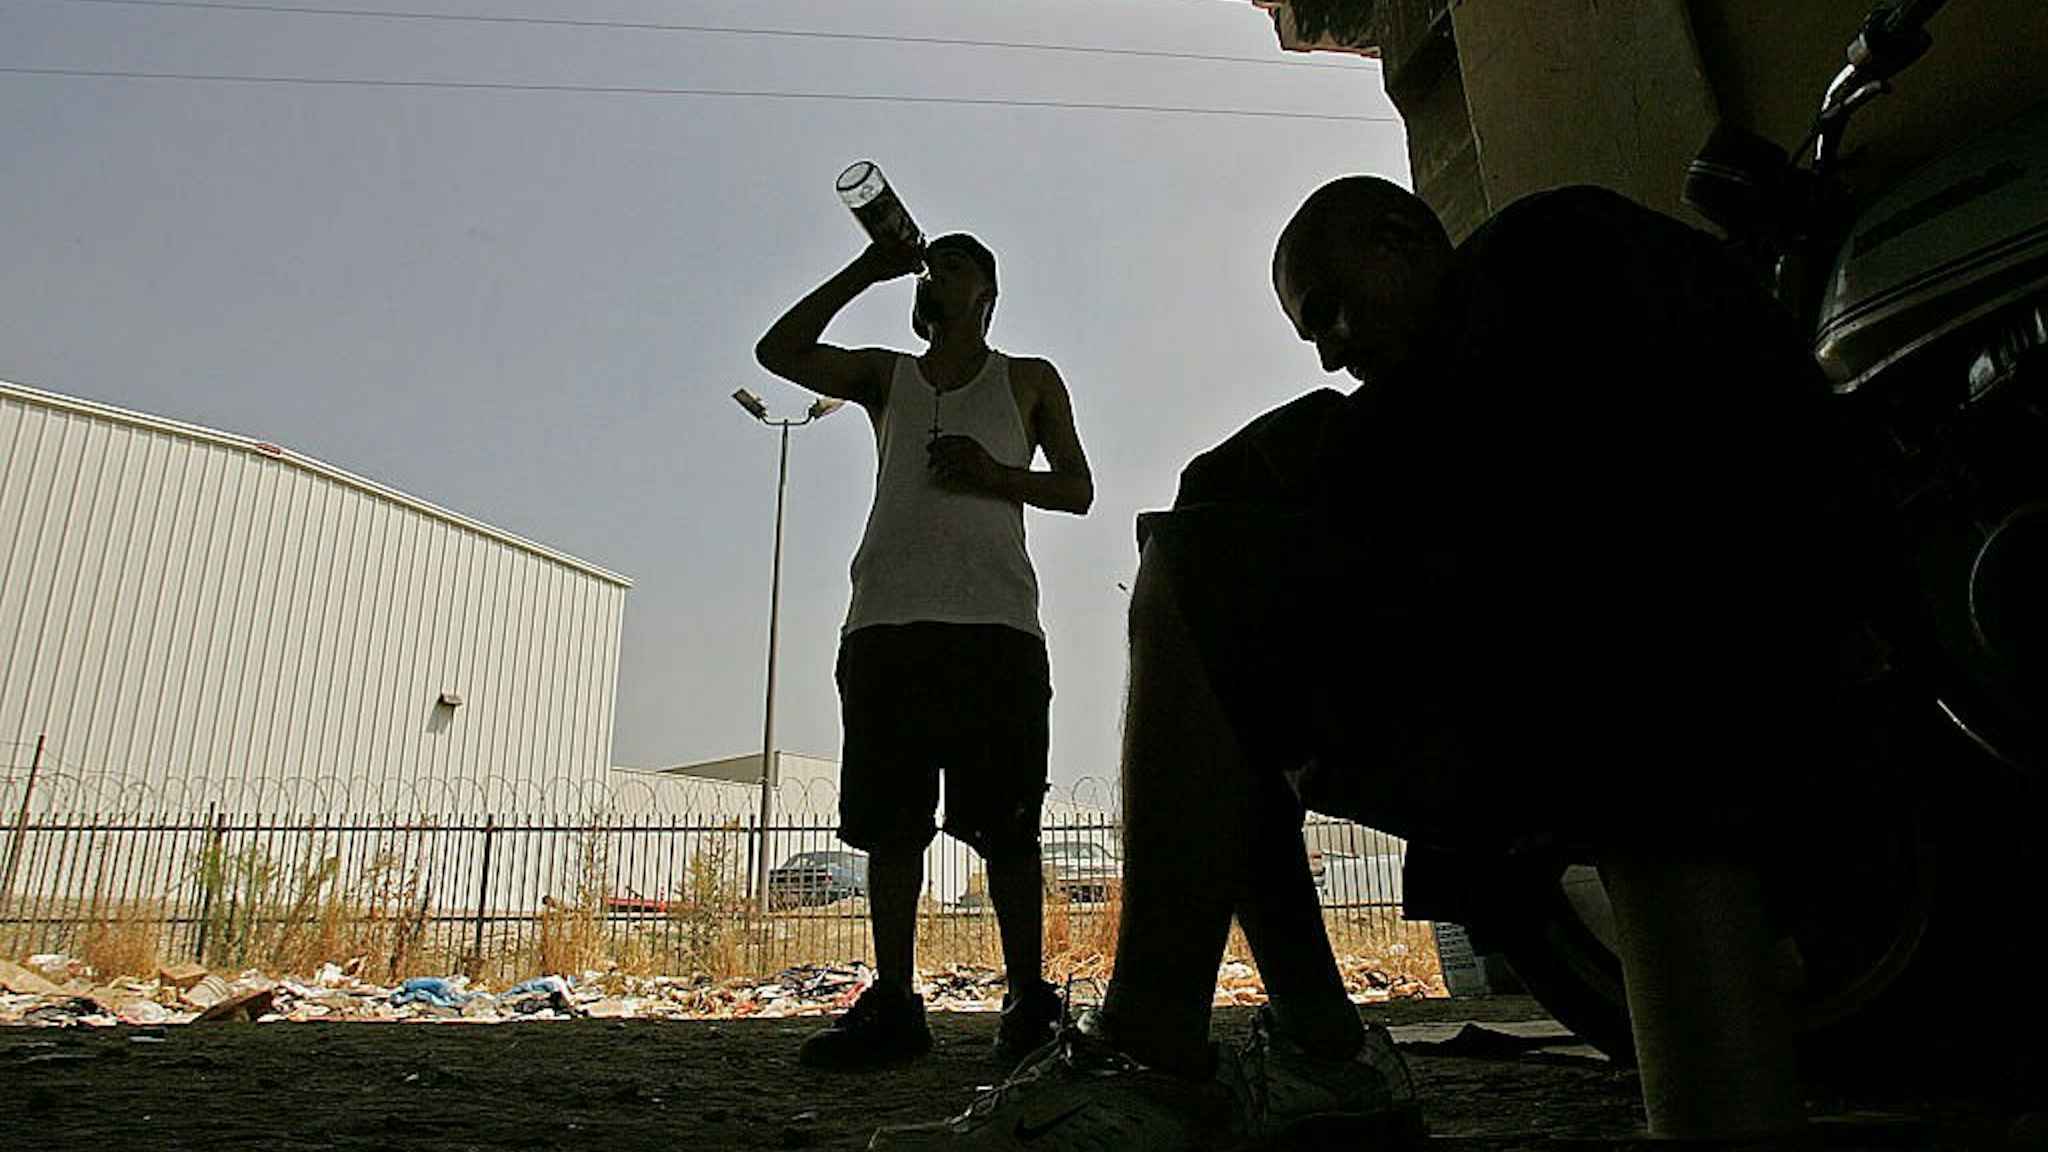 srael and Erasmus, a pair of homeless drug addicts, share a boittle of malt liquor at their encampment in downtown Los Angeles.